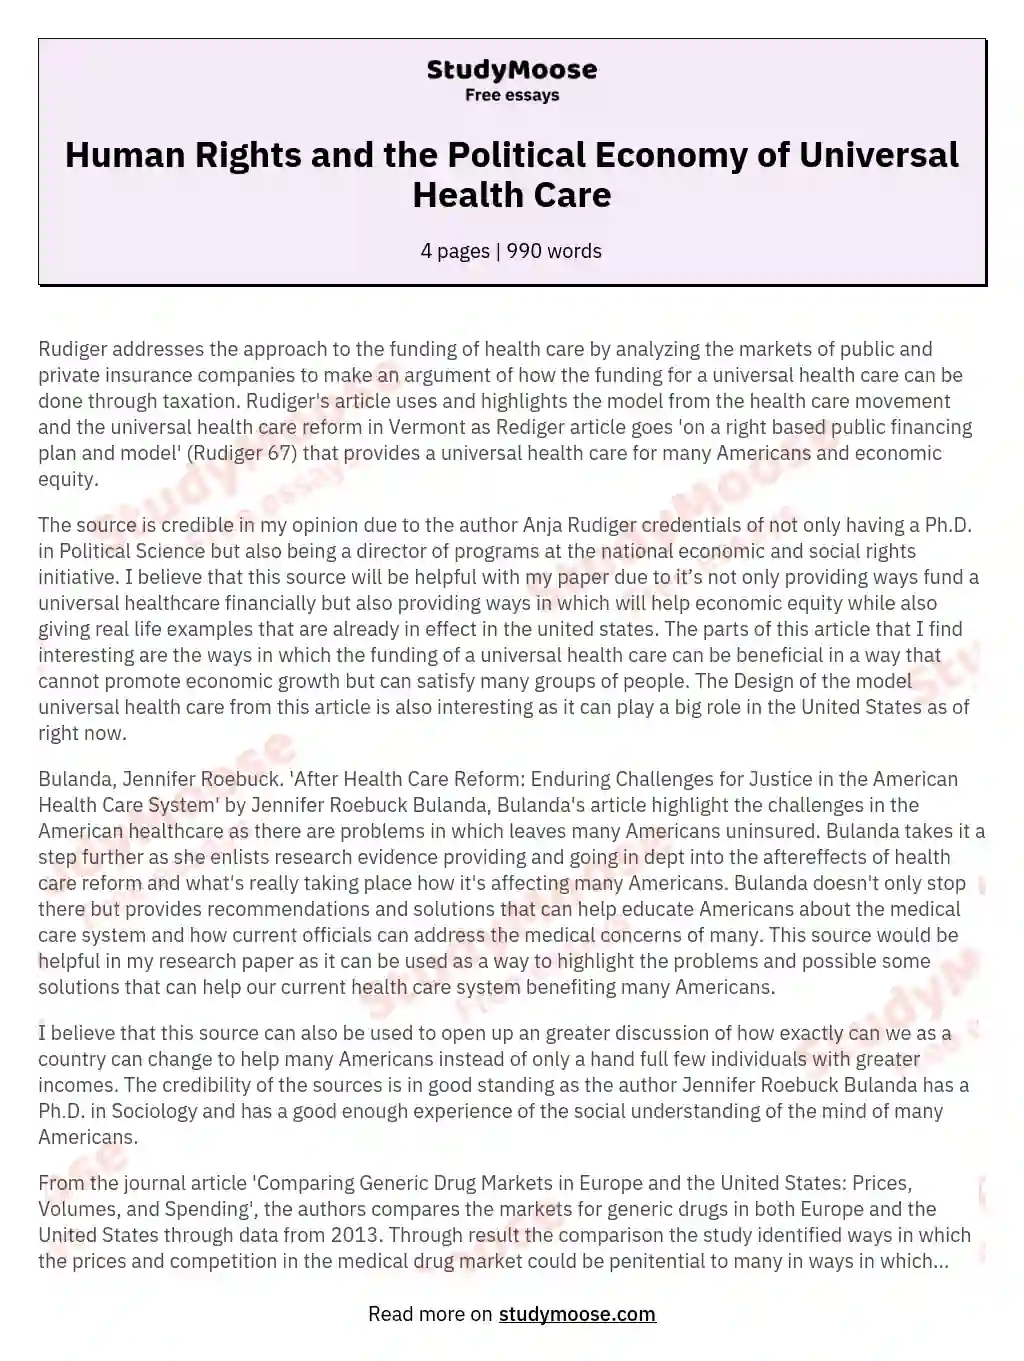 Human Rights and the Political Economy of Universal Health Care essay